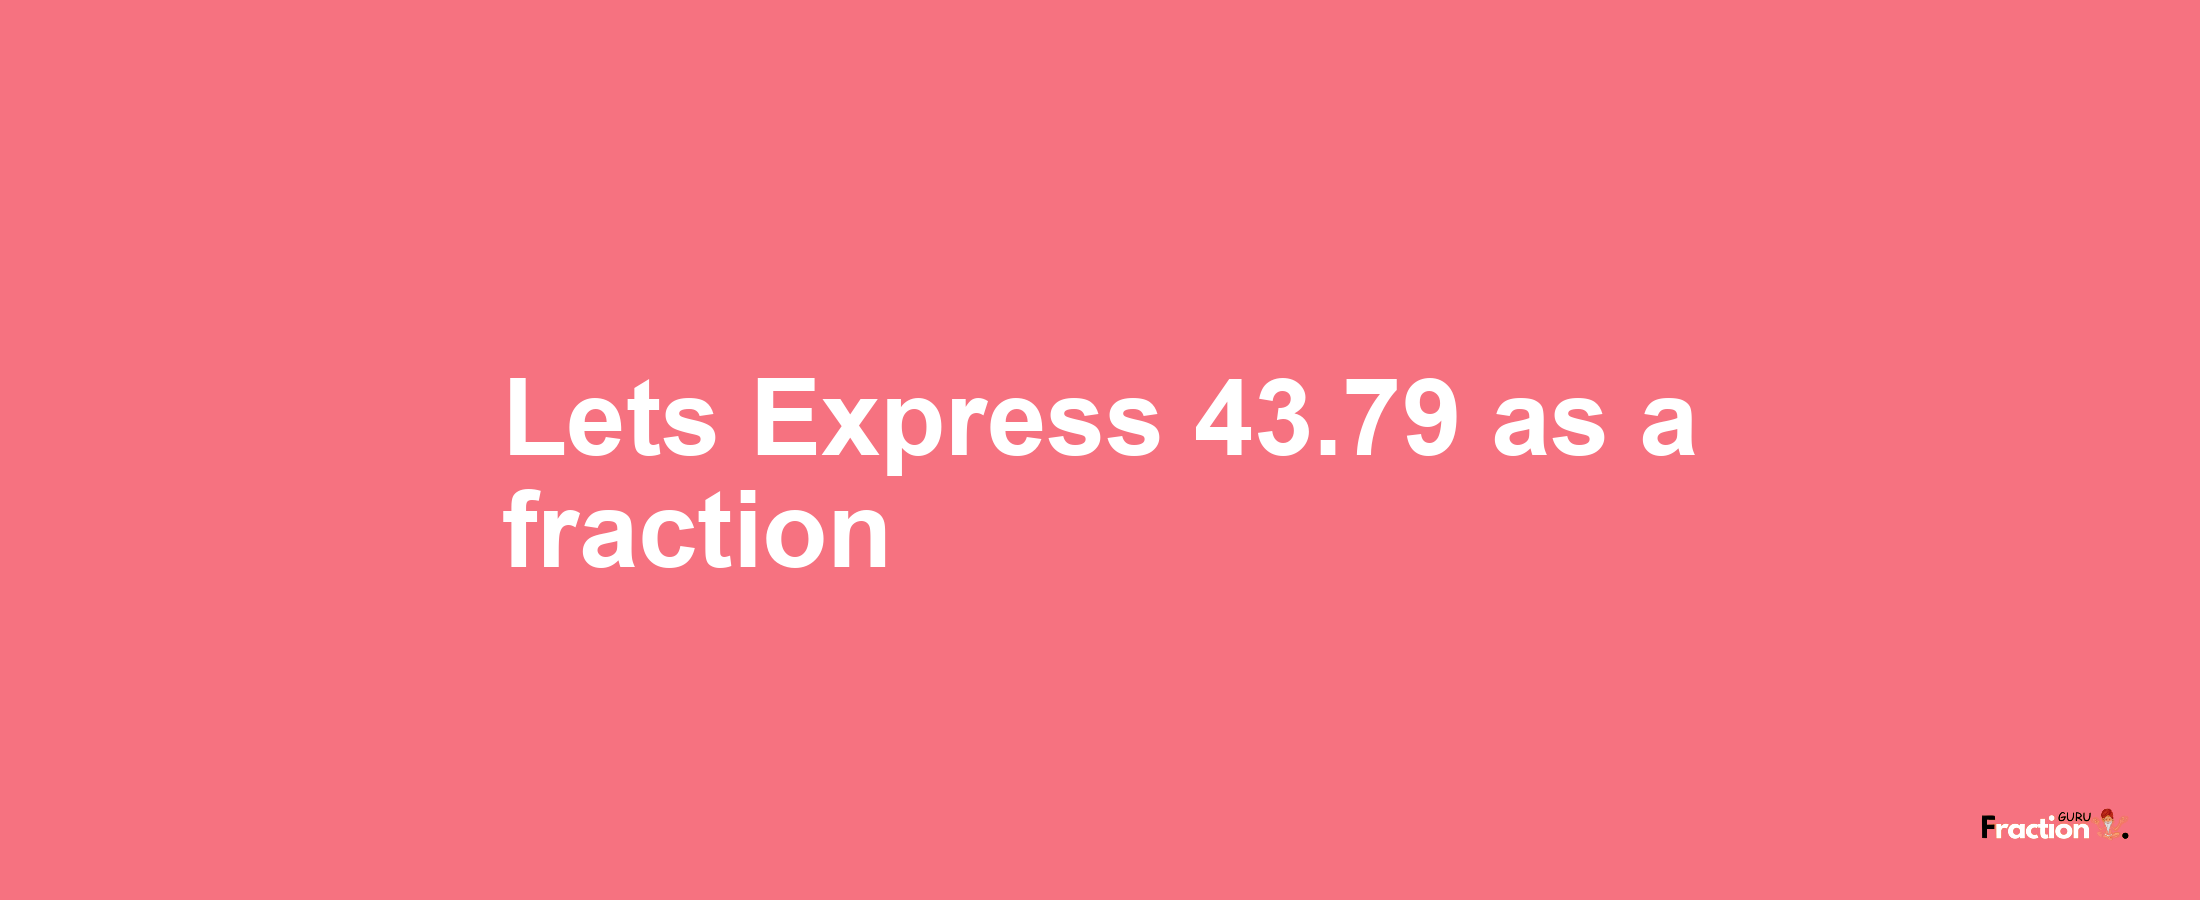 Lets Express 43.79 as afraction